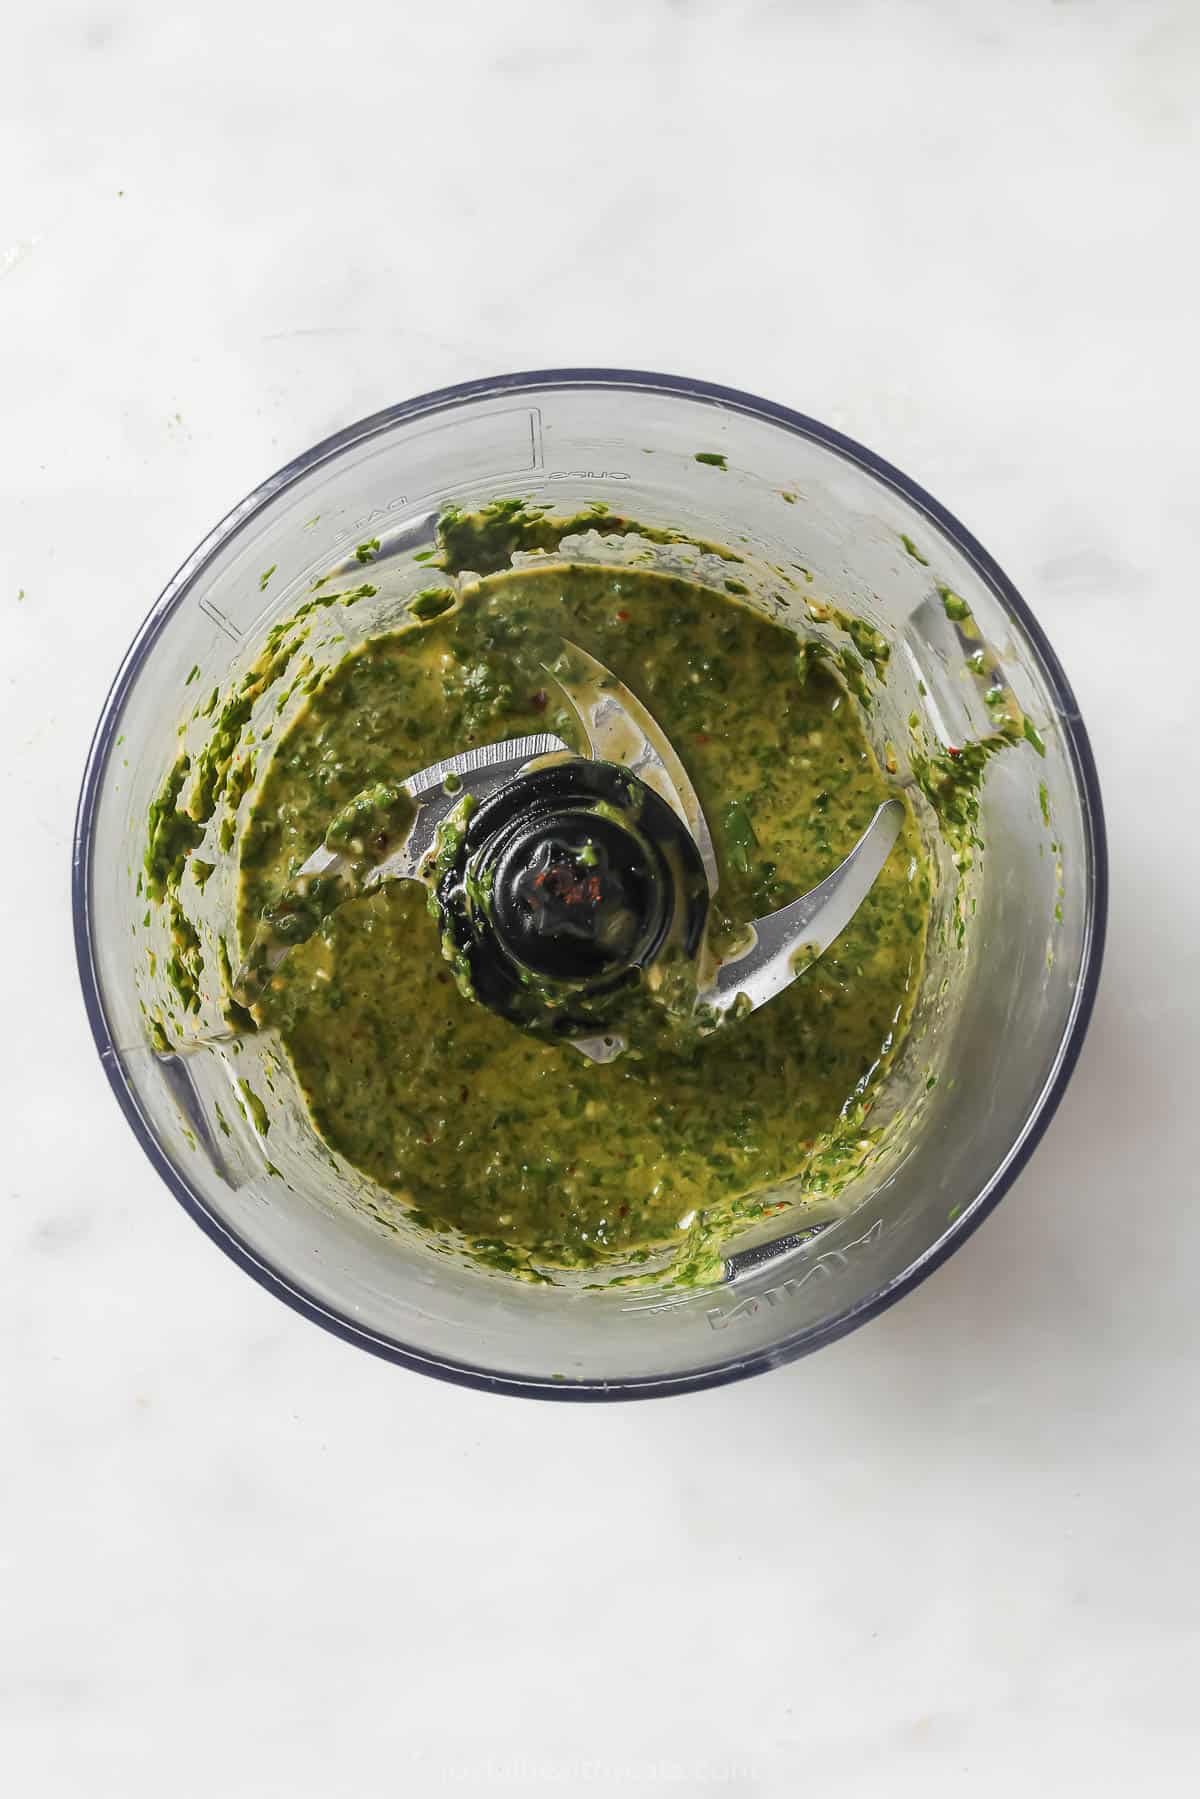 Blended chimichurri in the food processor. 